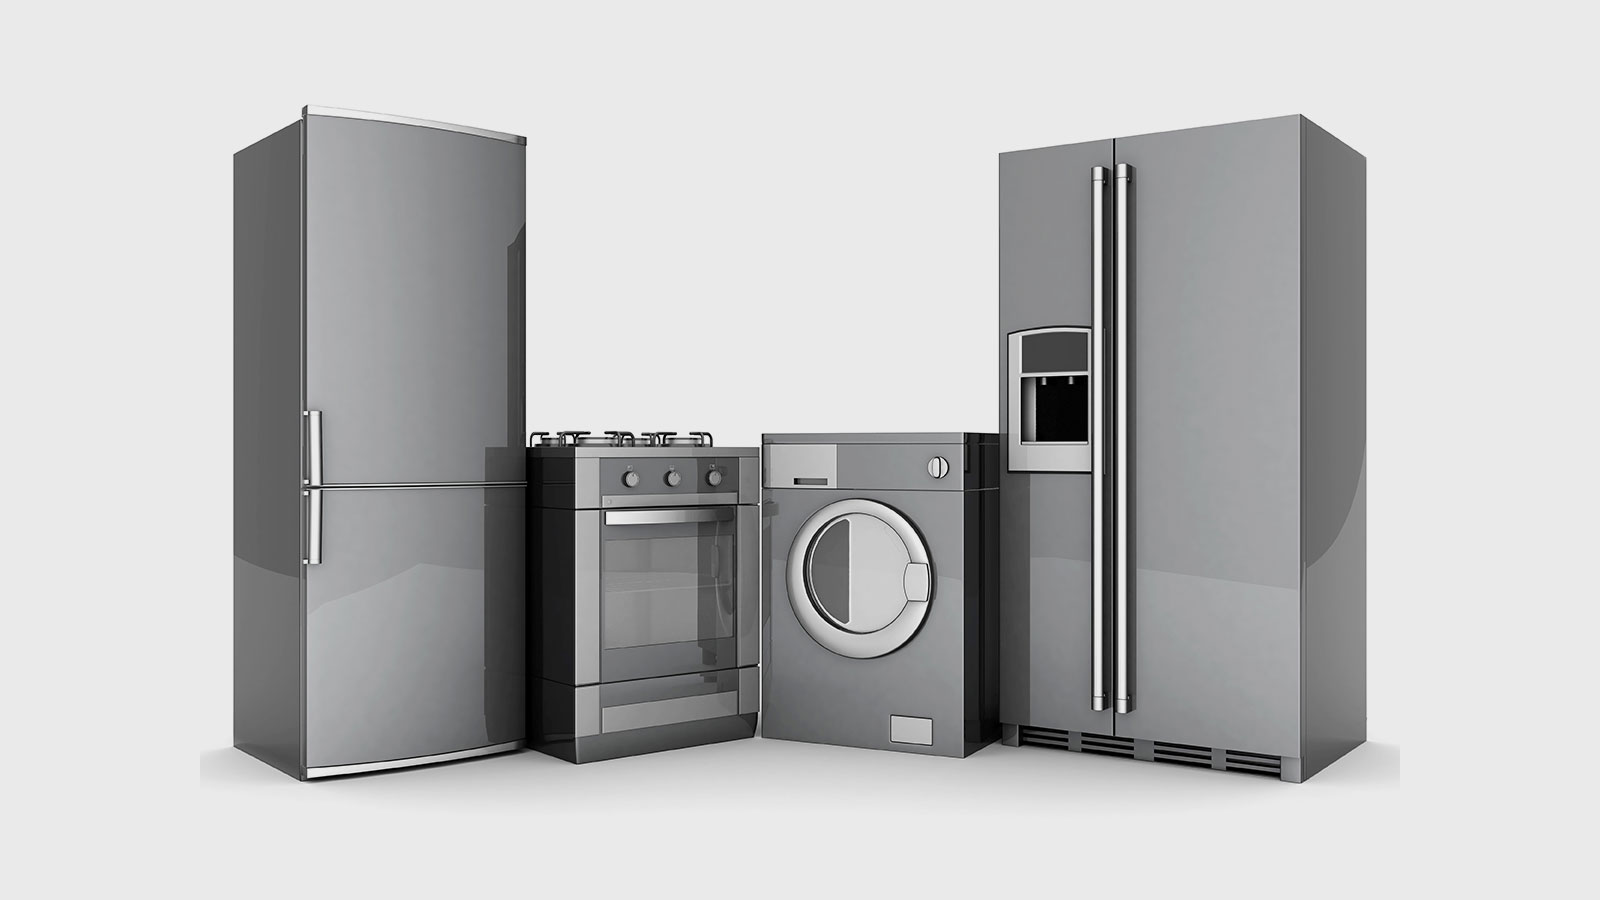 Brookswood Appliance Energy Star-Rated Appliance Sales